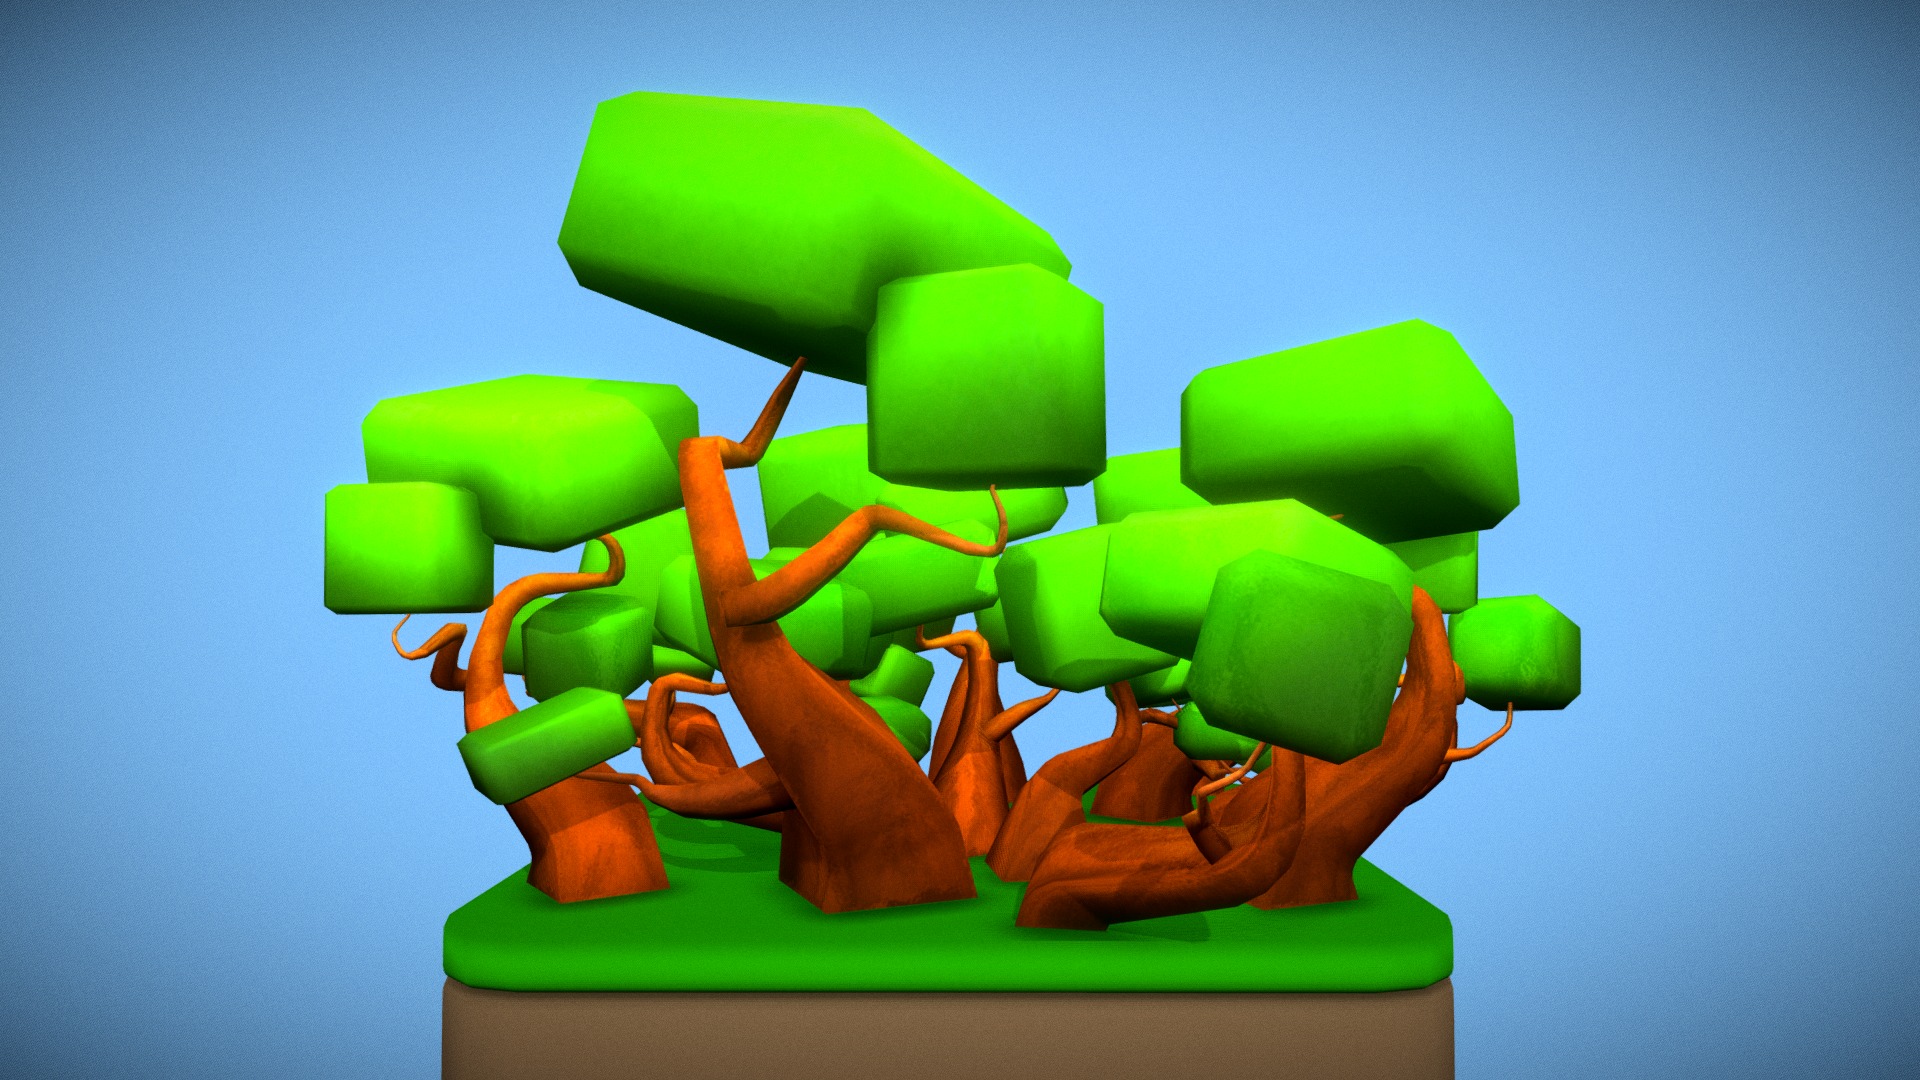 3D model Stylized Low Poly Trees - This is a 3D model of the Stylized Low Poly Trees. The 3D model is about a green and orange toy.